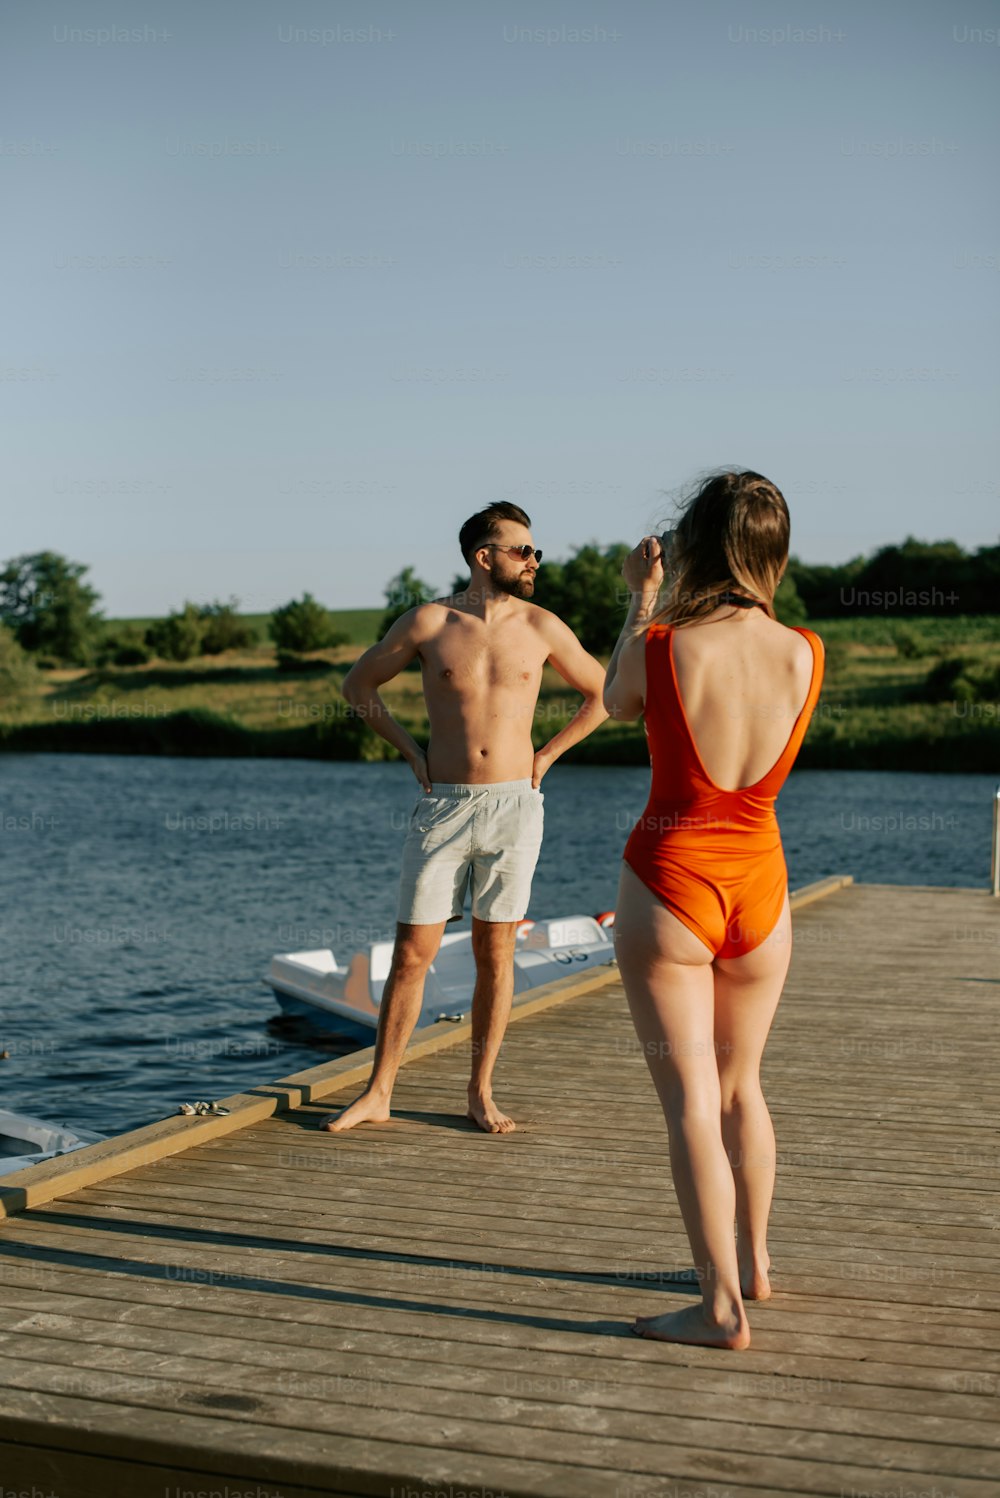 a man and woman standing on a dock next to a body of water